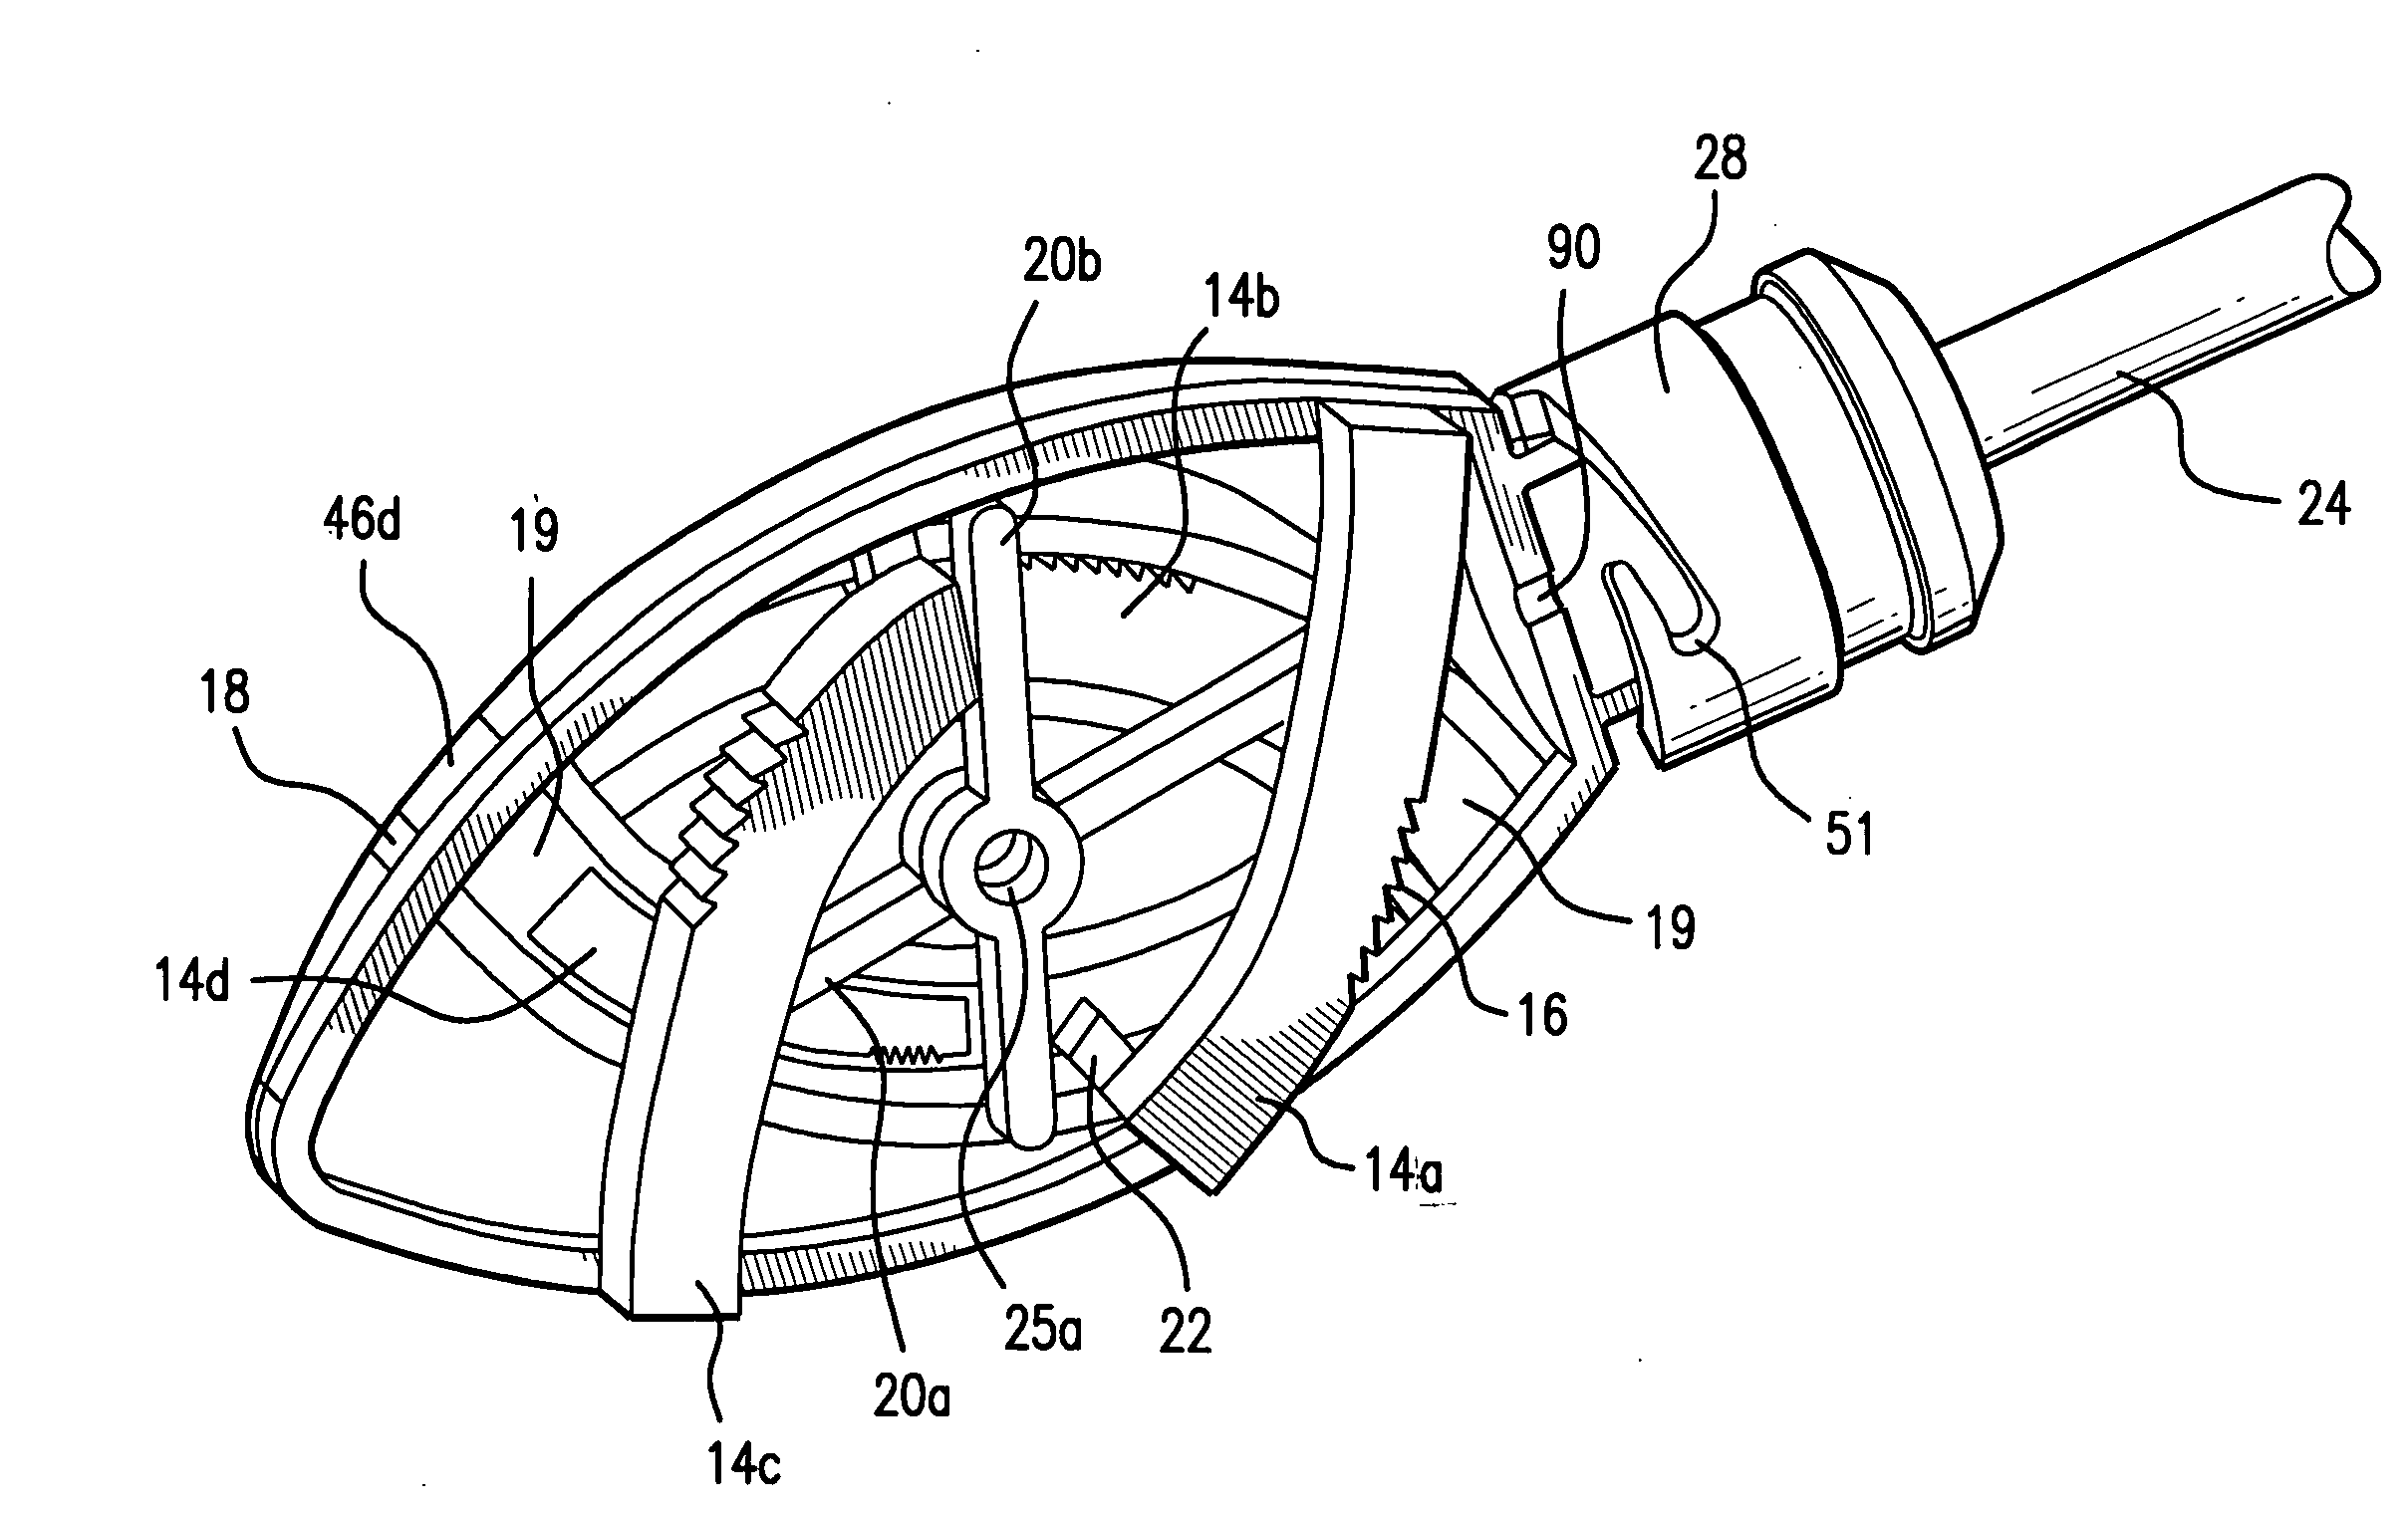 Interspinous implants and methods for implanting same